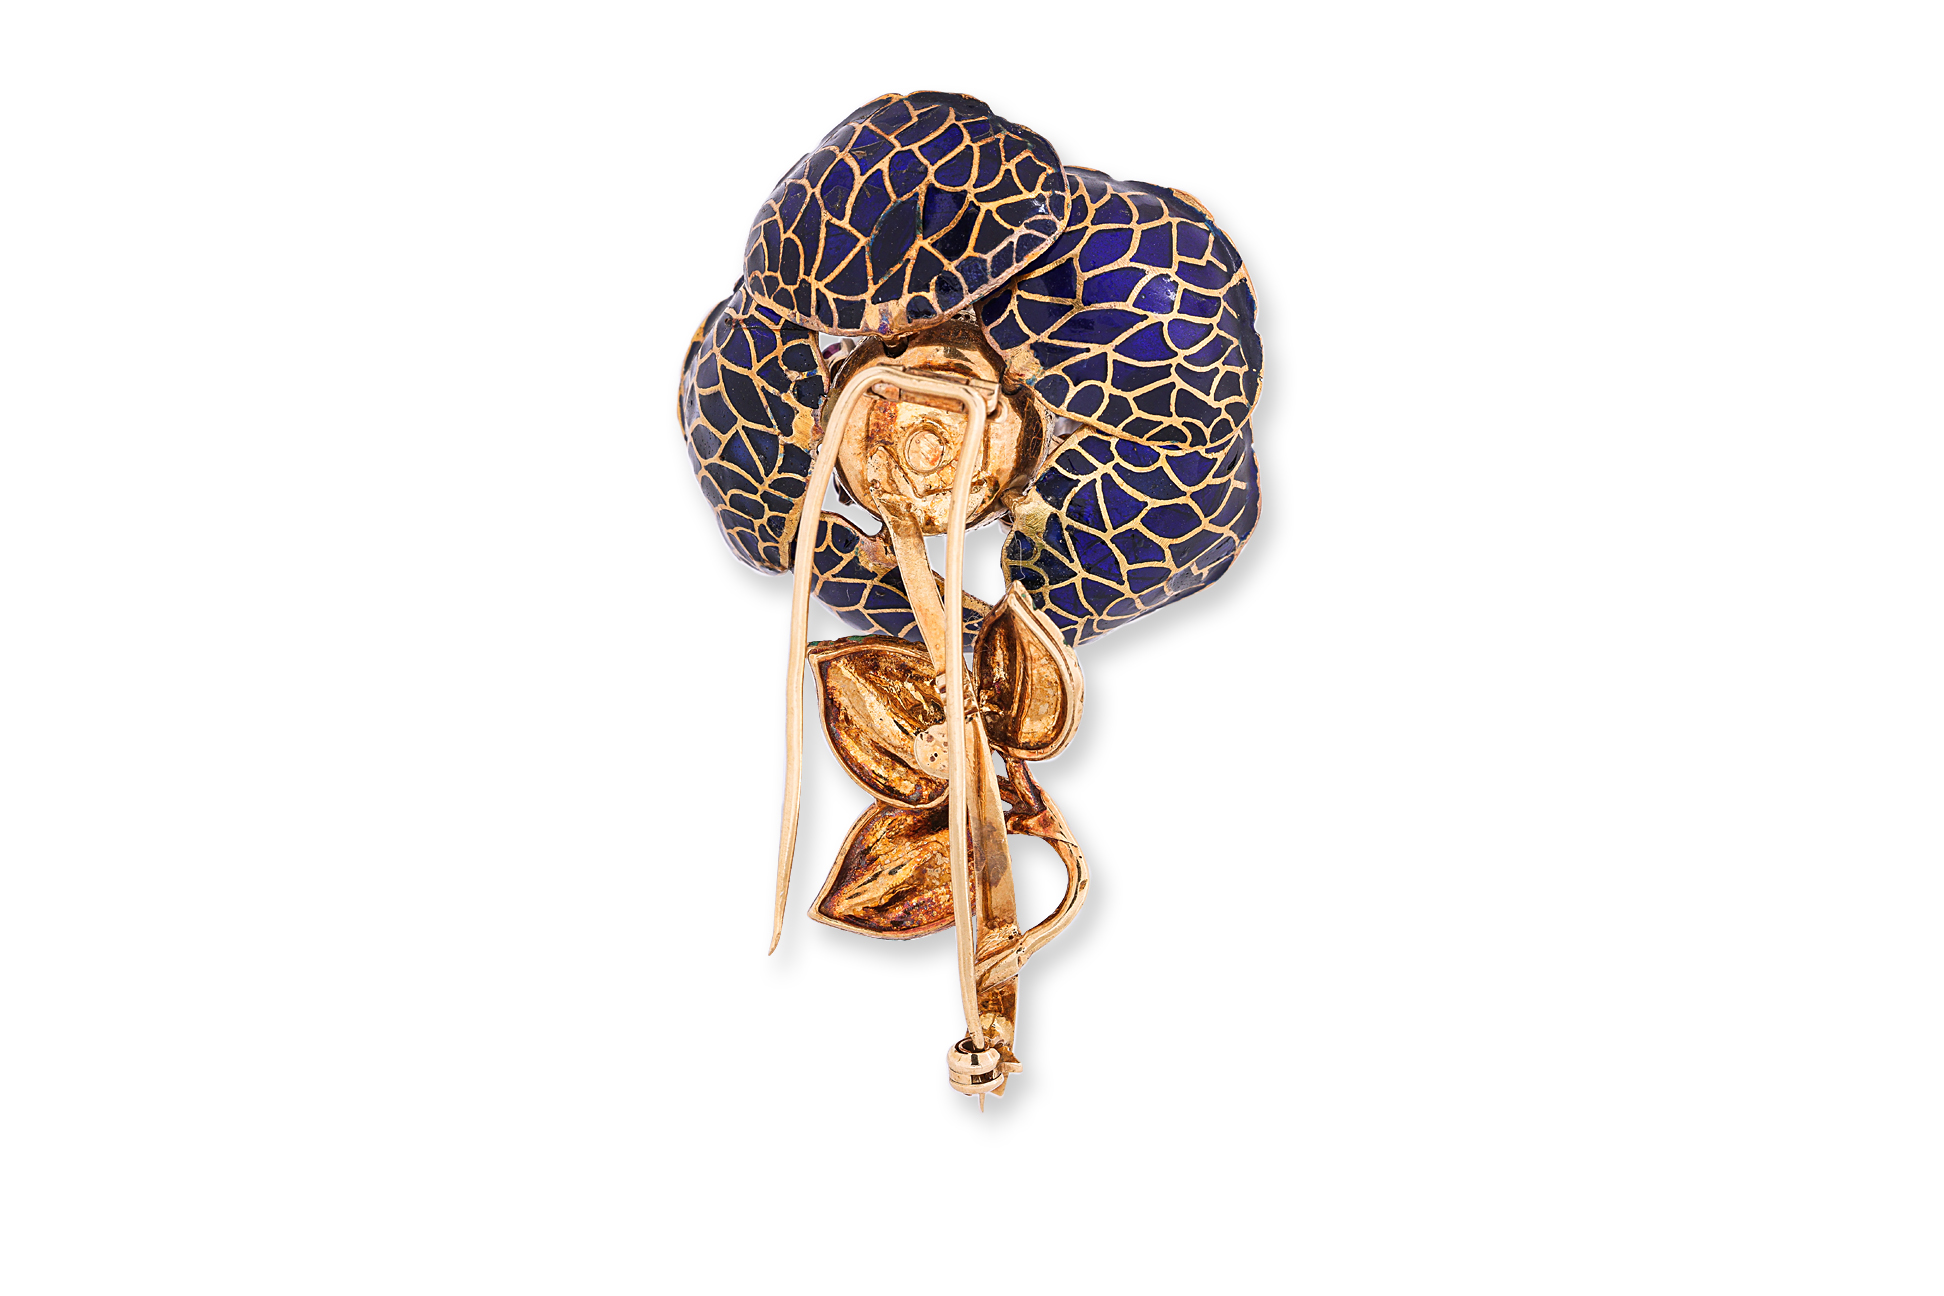 A RUBY AND DIAMOND PLIQUE-A-JOUR ENAMEL 'ROSE' BROOCH - Image 3 of 4